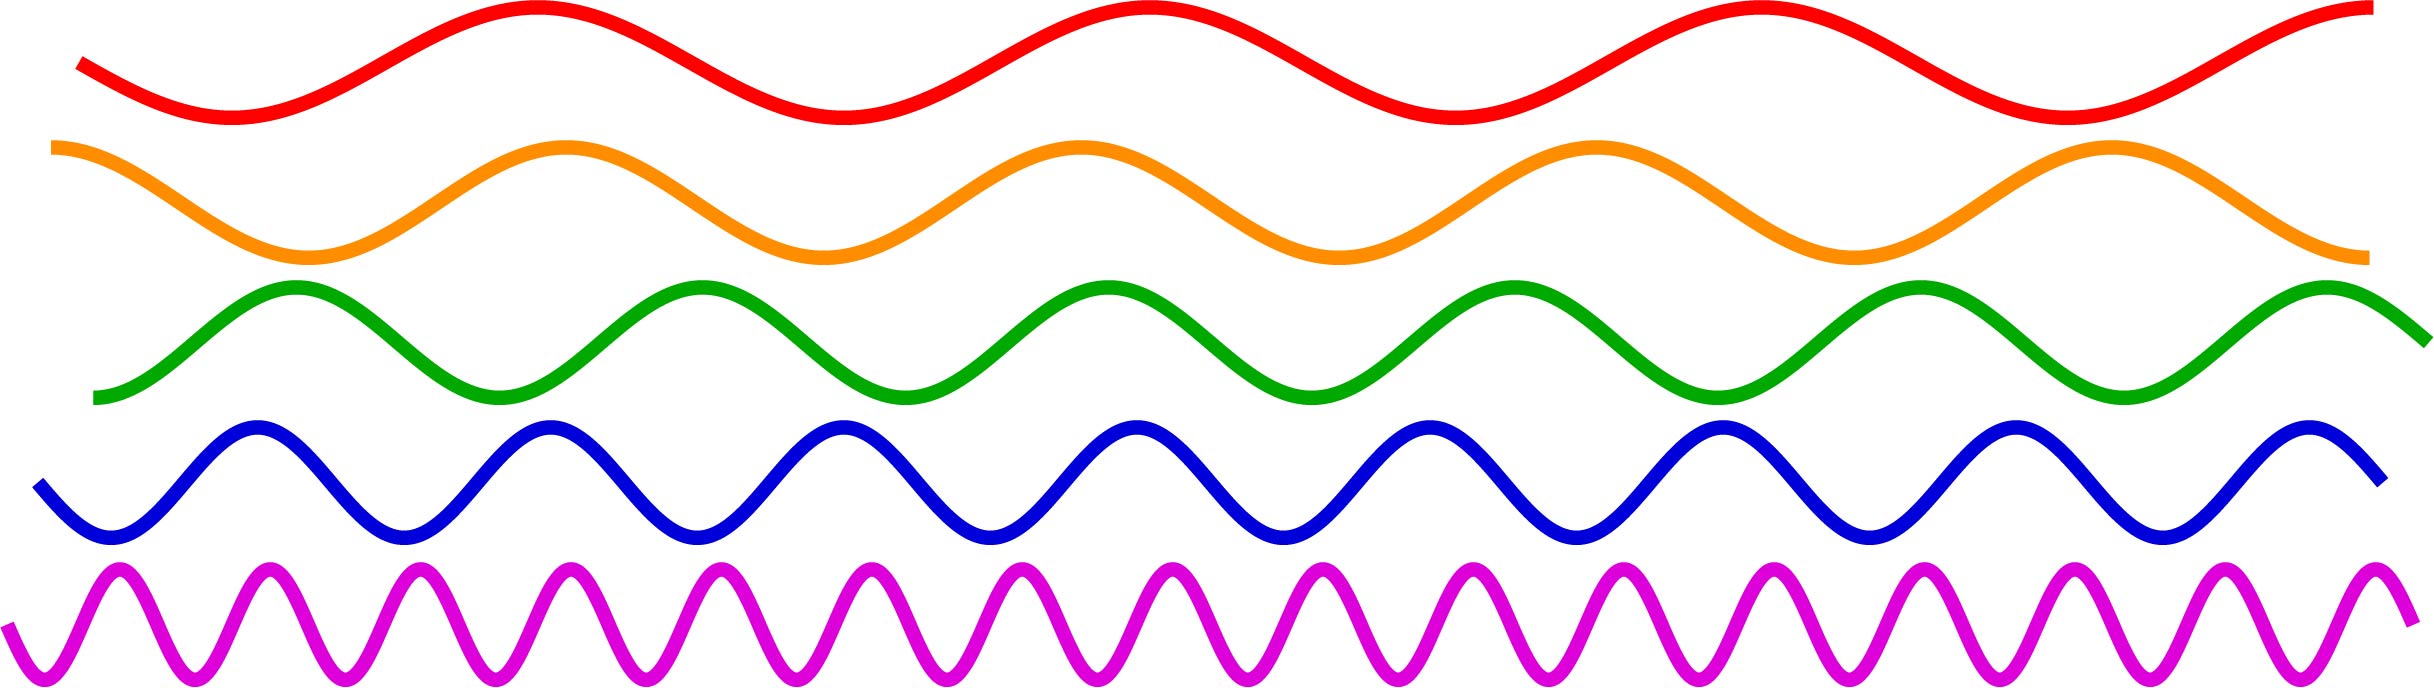 Fig. 2 As the wavelength of a light wave decreases, its frequency increases. The red light wave has a the highest wavelength and lowest frequency of the waves shown here, while the violet light wave has the lowest wavelength and highest frequency.